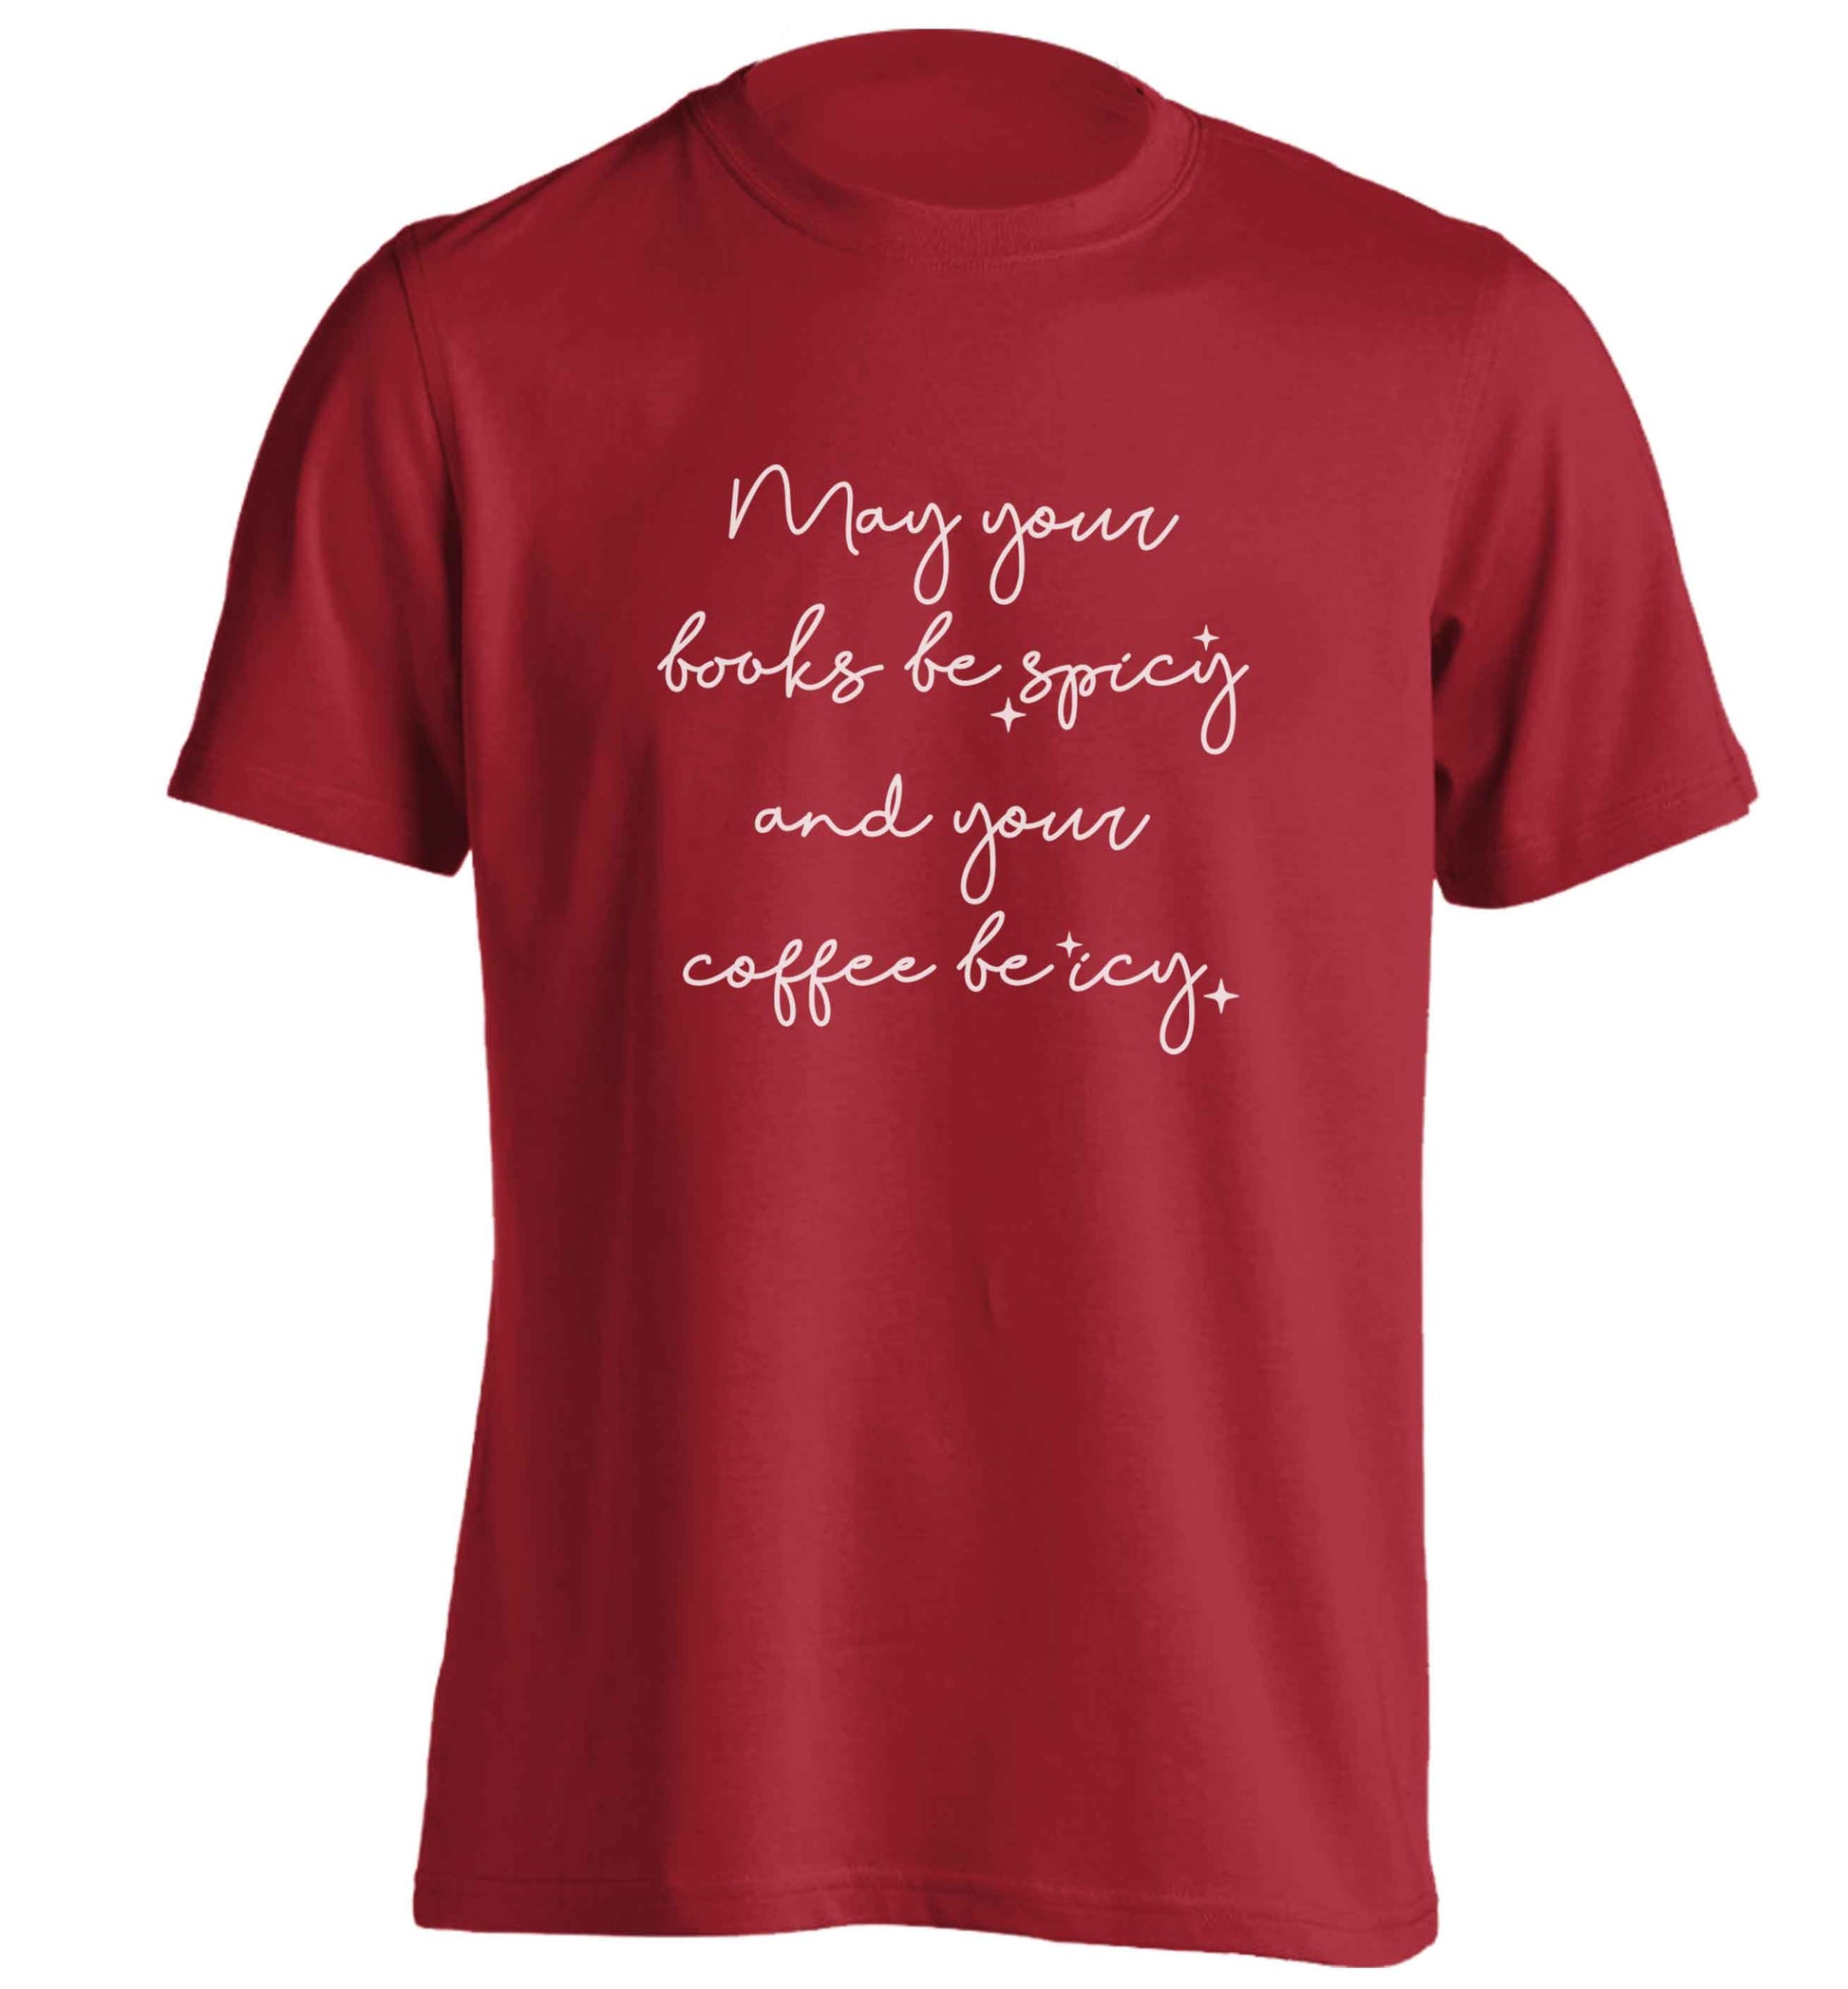 May your books be spicy and your coffee be icy adults unisex red Tshirt 2XL